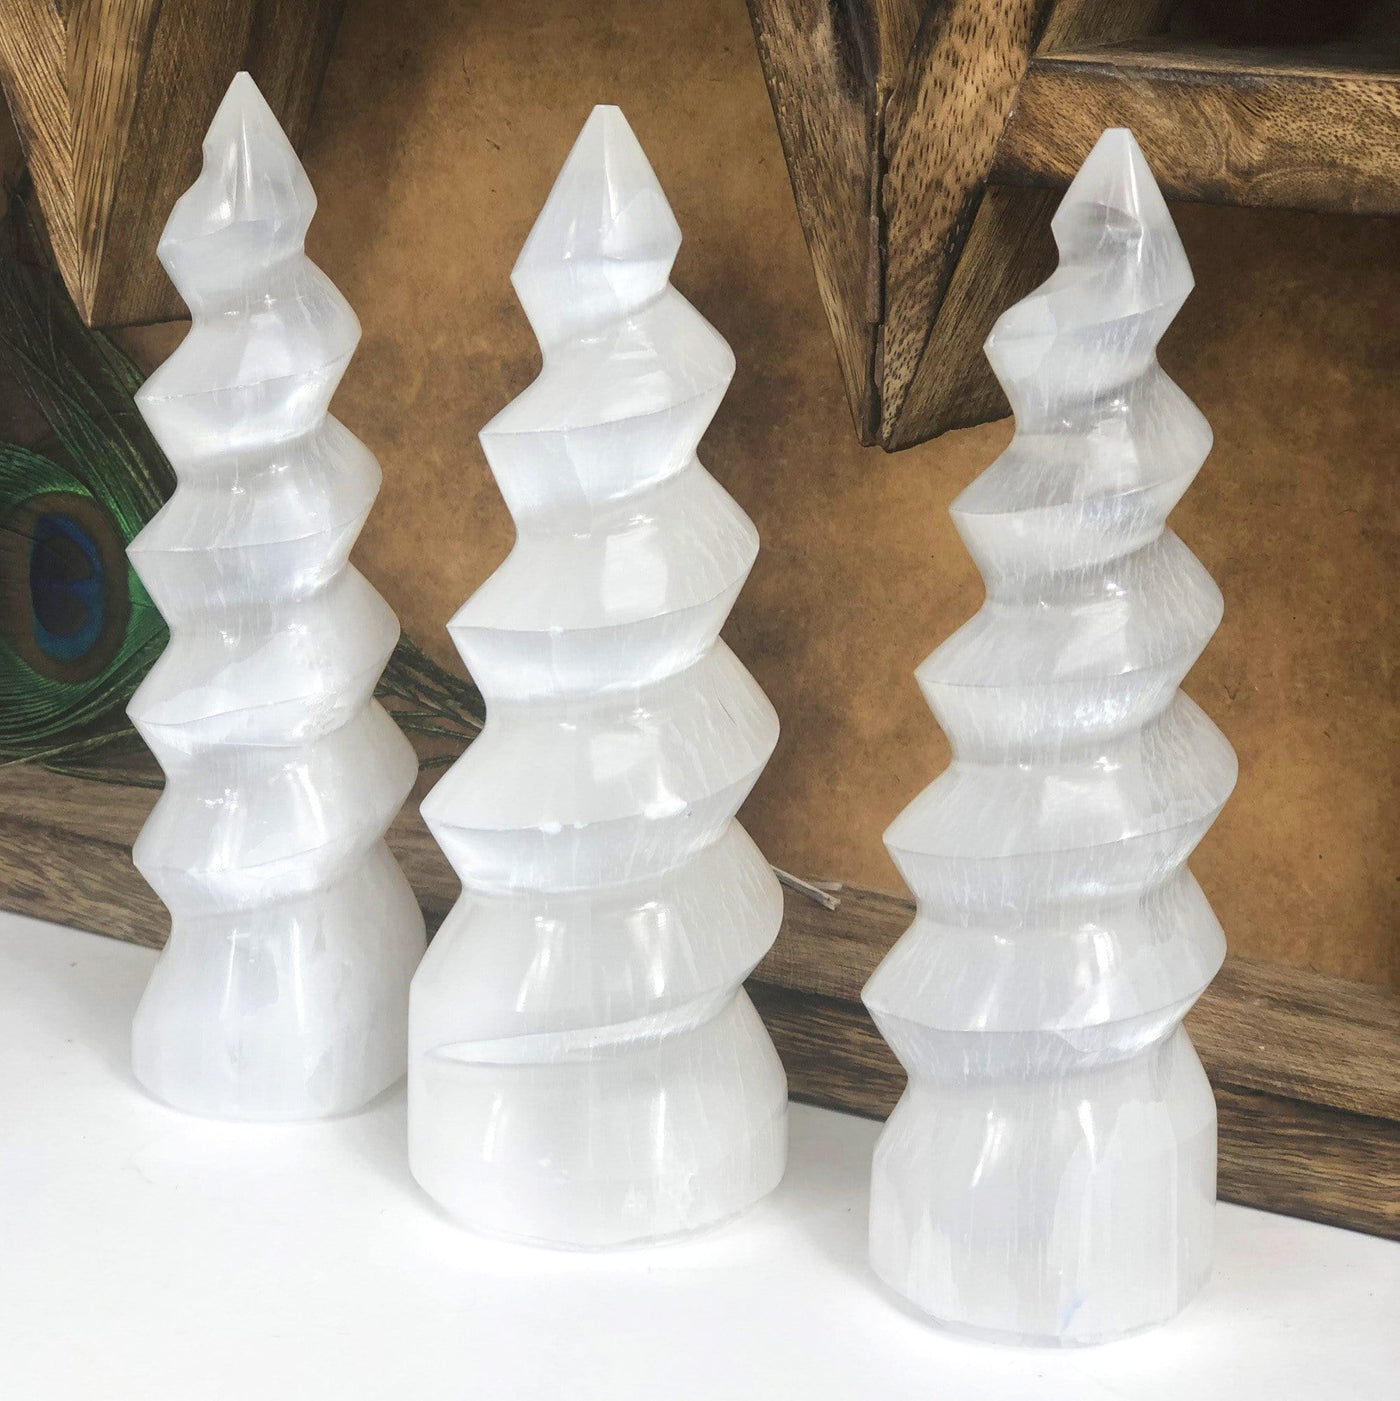 three selenite spiral towers on display for possible variations